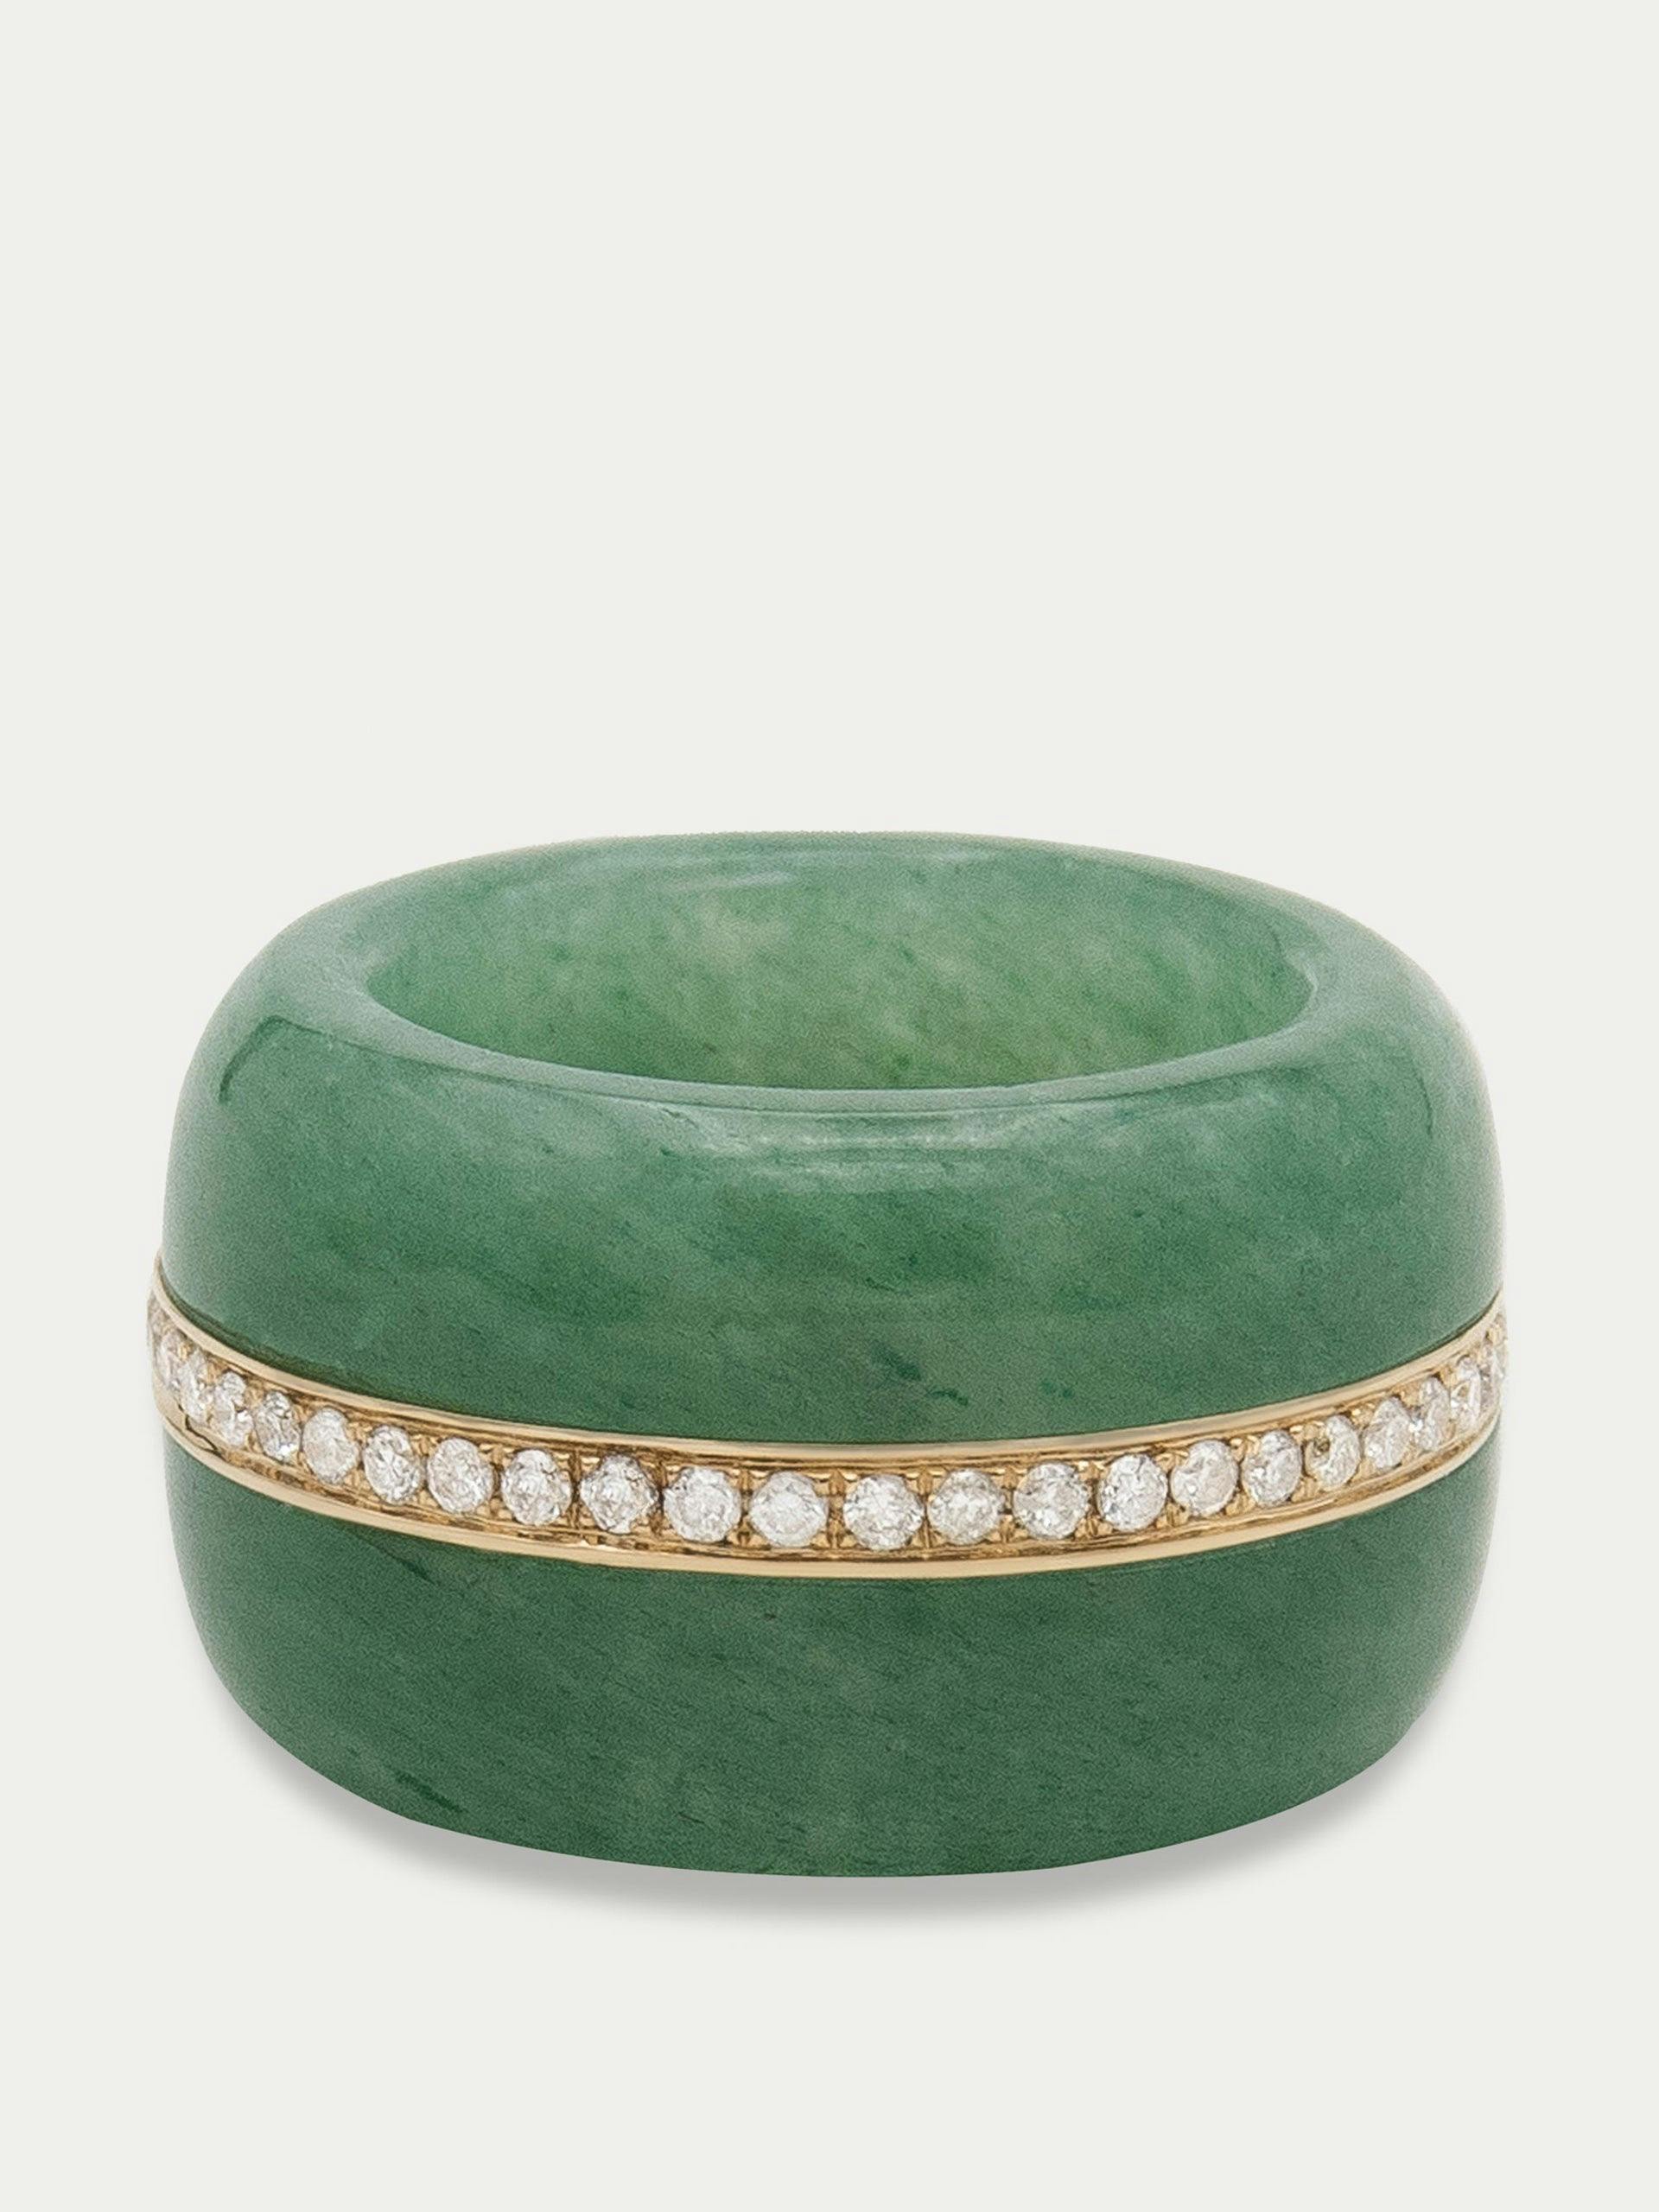 Pebble cocktail ring in green aventurine